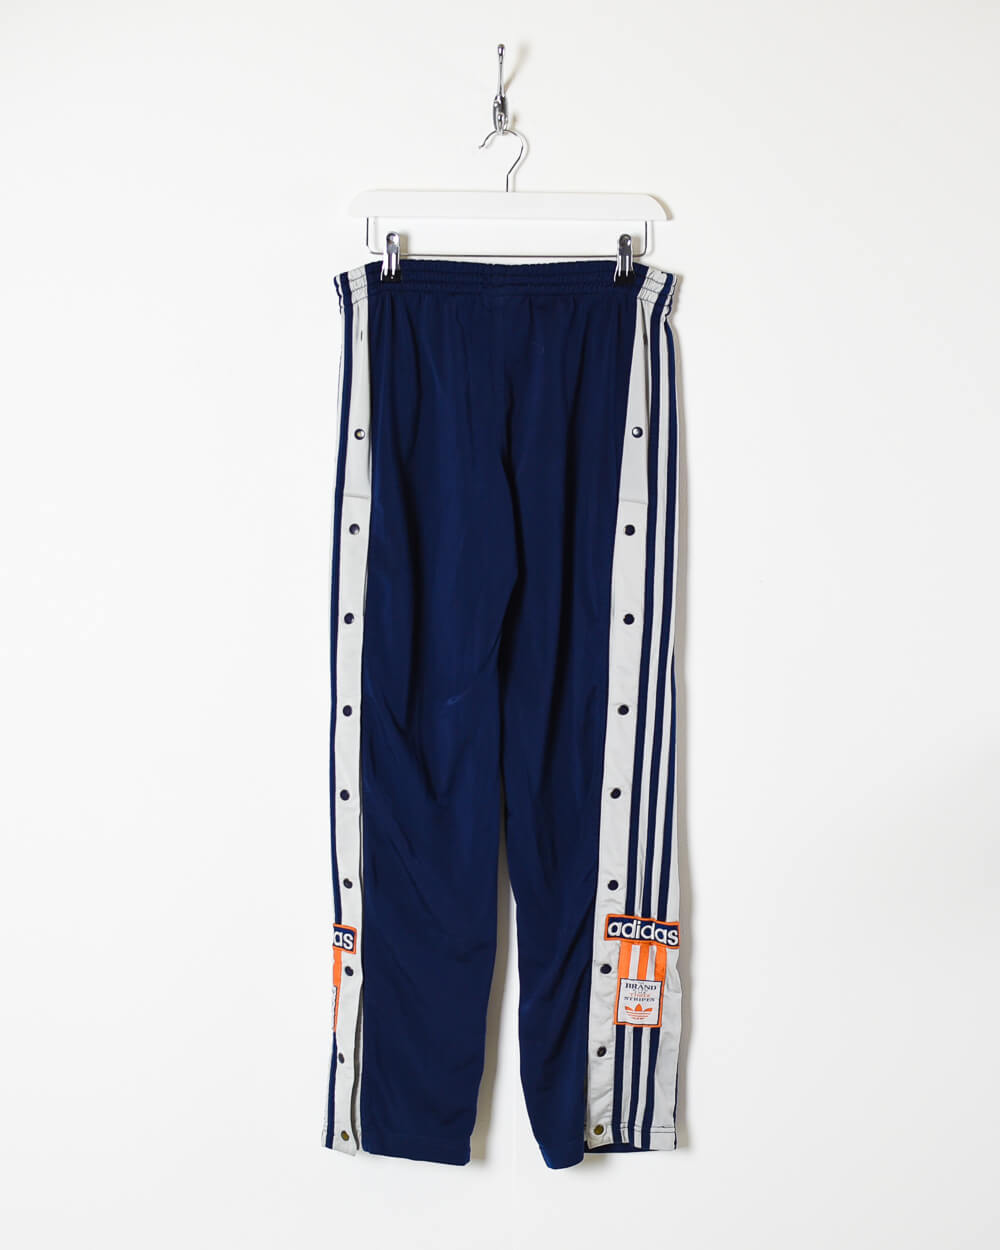 Navy Adidas The Brand With The Three Stripes Tracksuit Bottom - W30